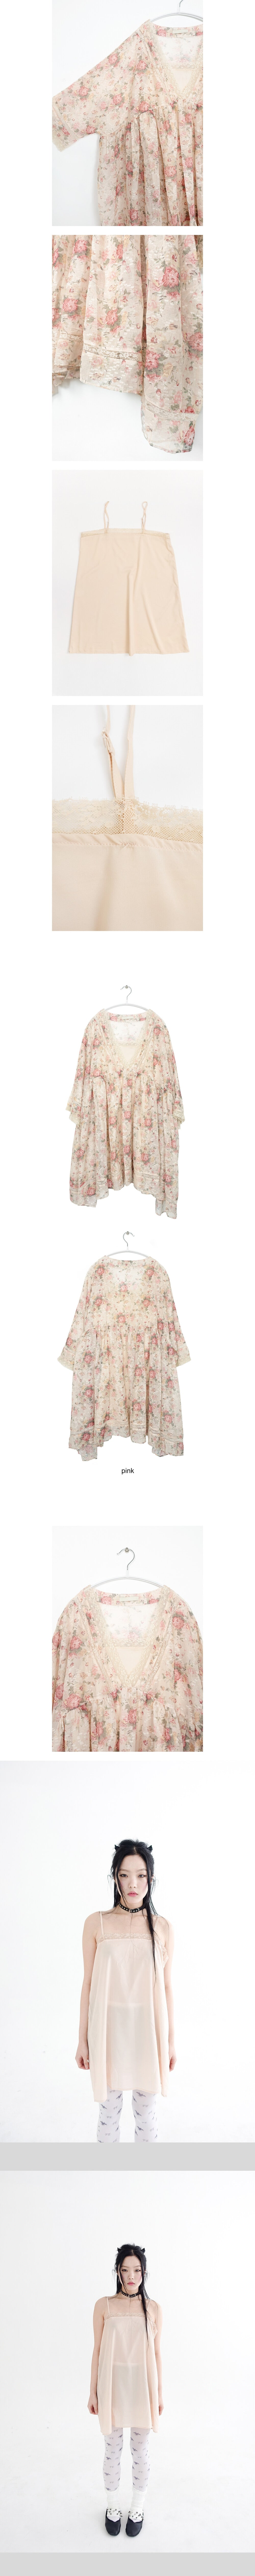 blooming flower tunic dress